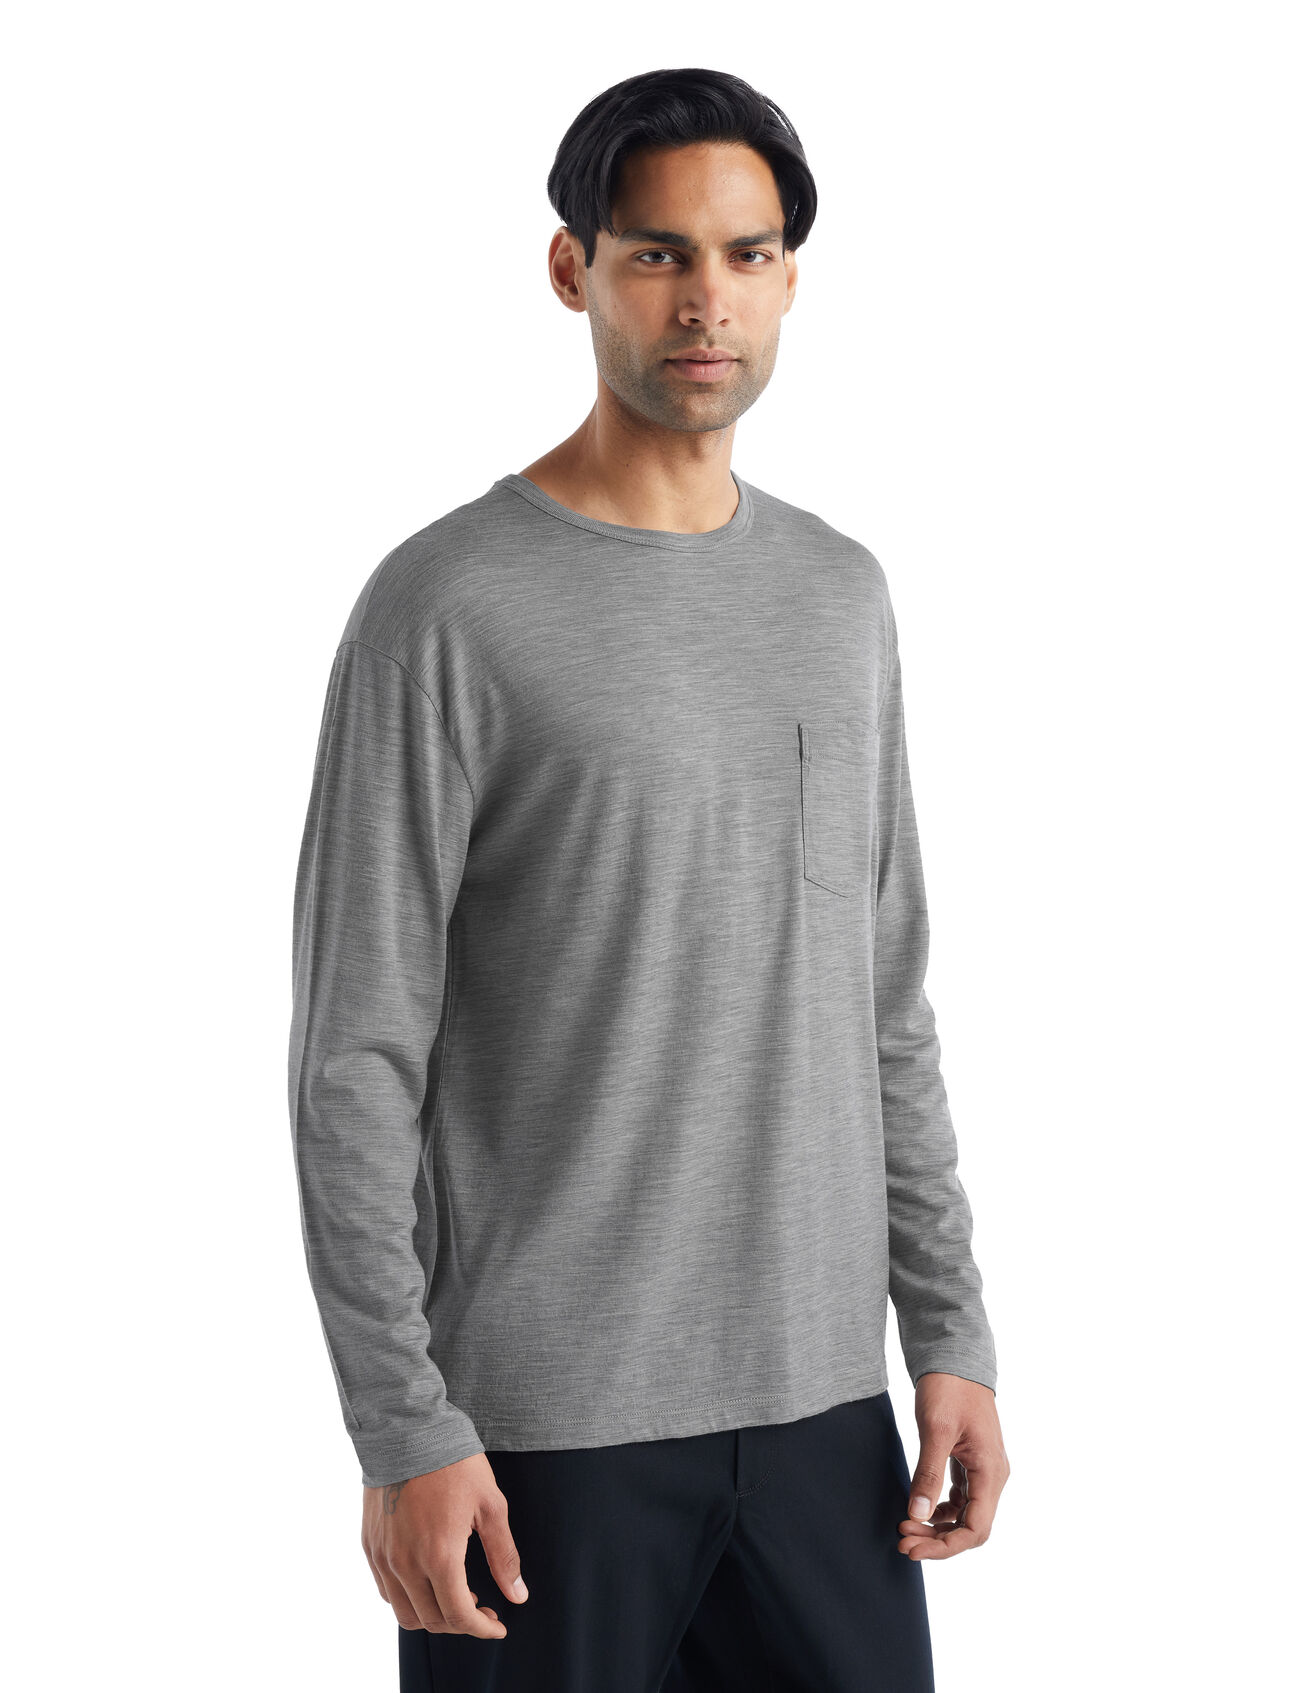 Mens Merino Granary Long Sleeve Pocket Tee A classic pocket tee with a relaxed fit and soft, breathable, 100% merino wool fabric, the Granary Long Sleeve Pocket Tee is all about everyday comfort and style.